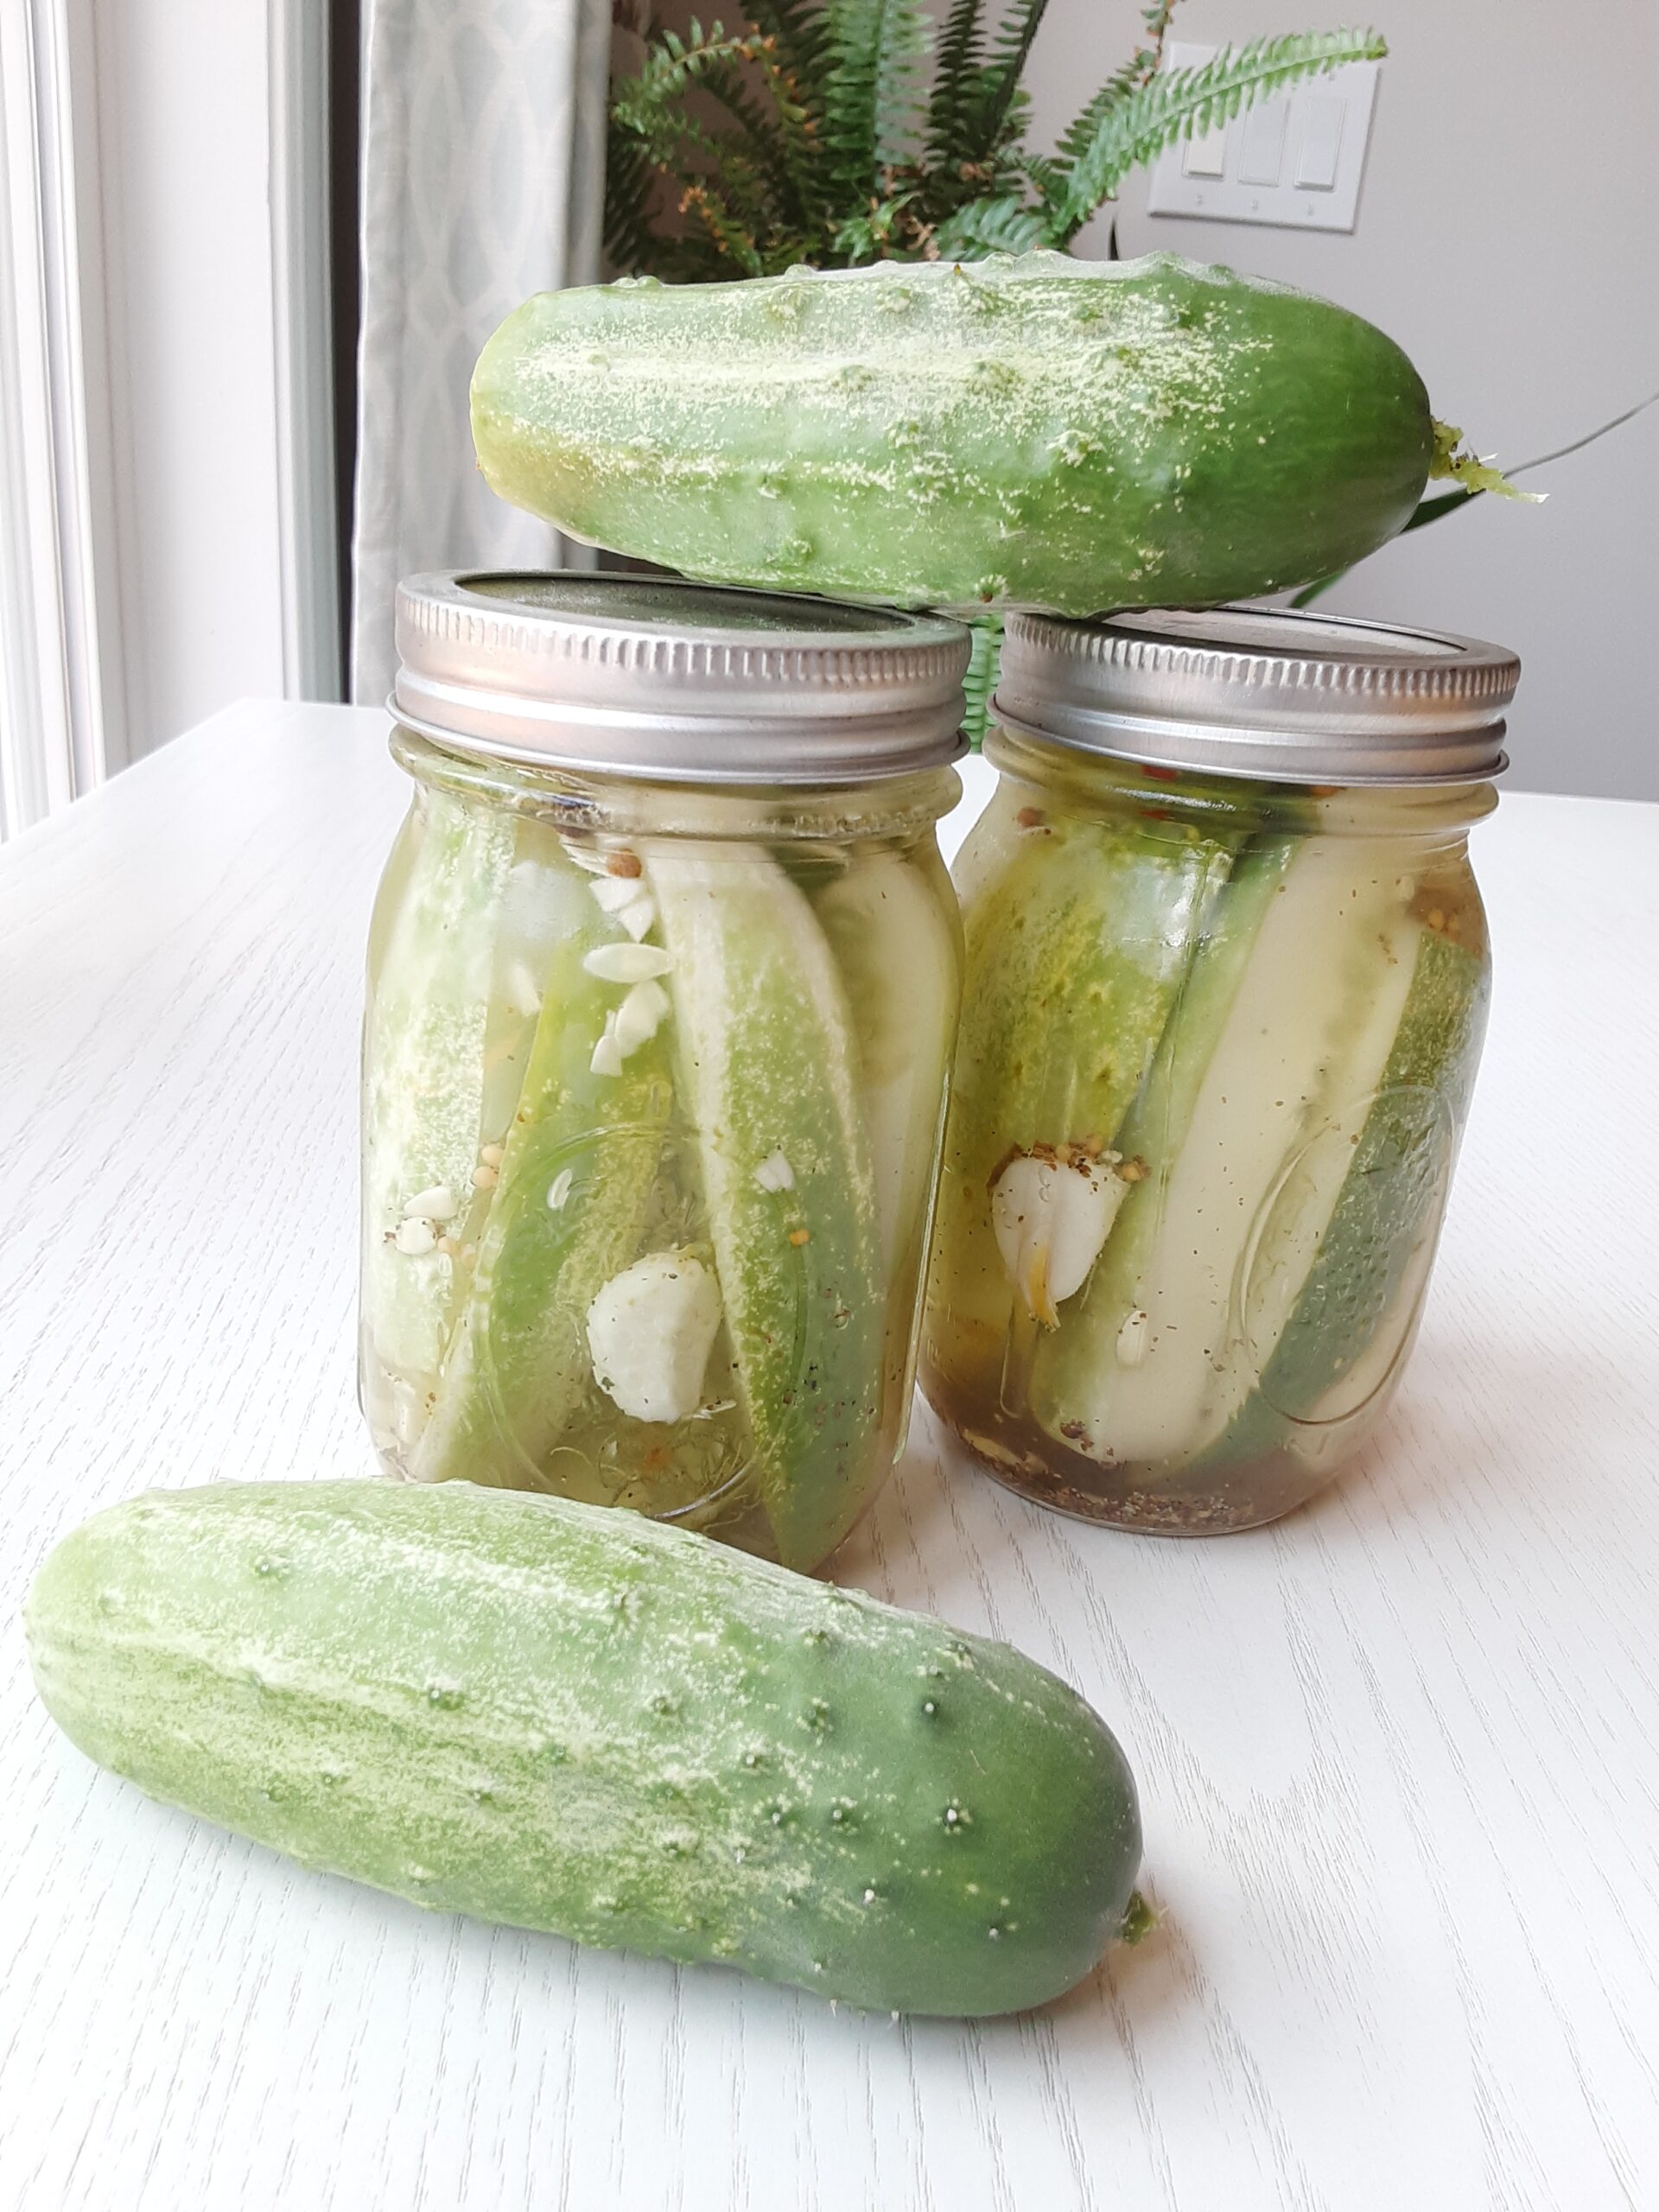 homemade pickles in conning jars